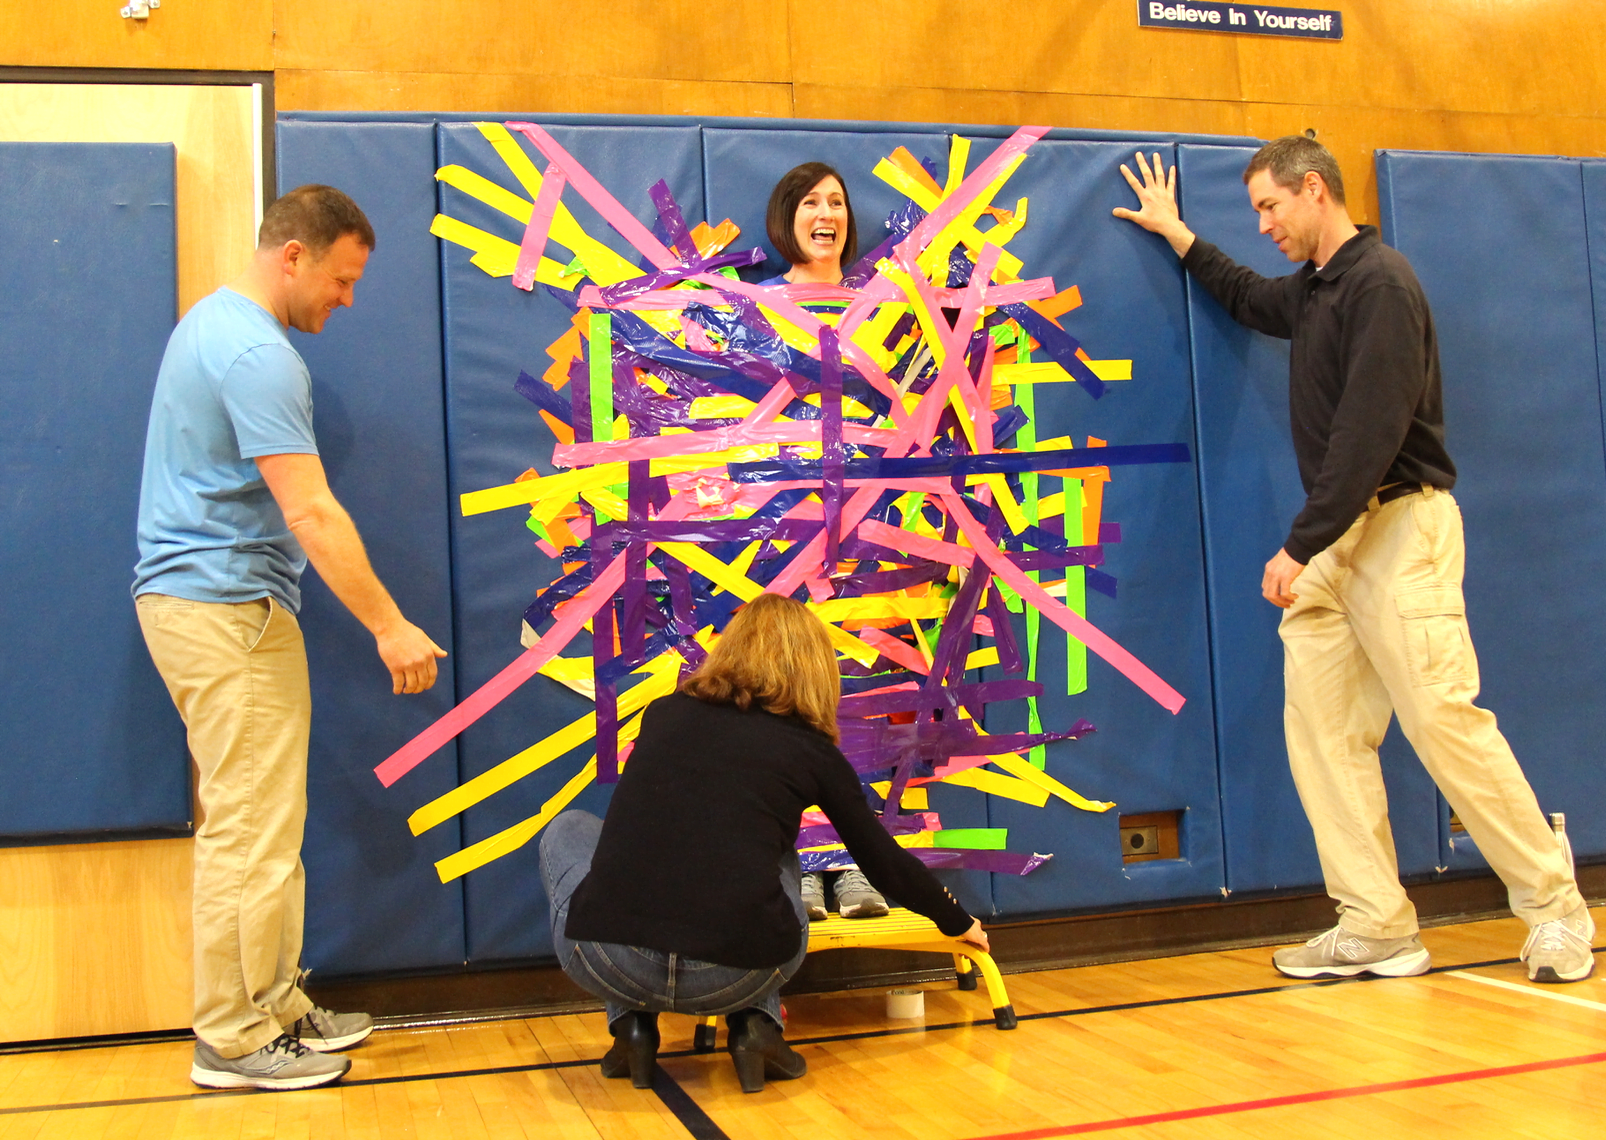 PE teachers David Bruni and Cristofer Brown with Assistant Principal Kathleen Ramirez, preparing to peel Principal Jill Flood off the wall at North Street School after a successful "pennies for patients" drive to benefit Leukemia & Lymphoma Society. March 22, 2019 Photo: Leslie Yager